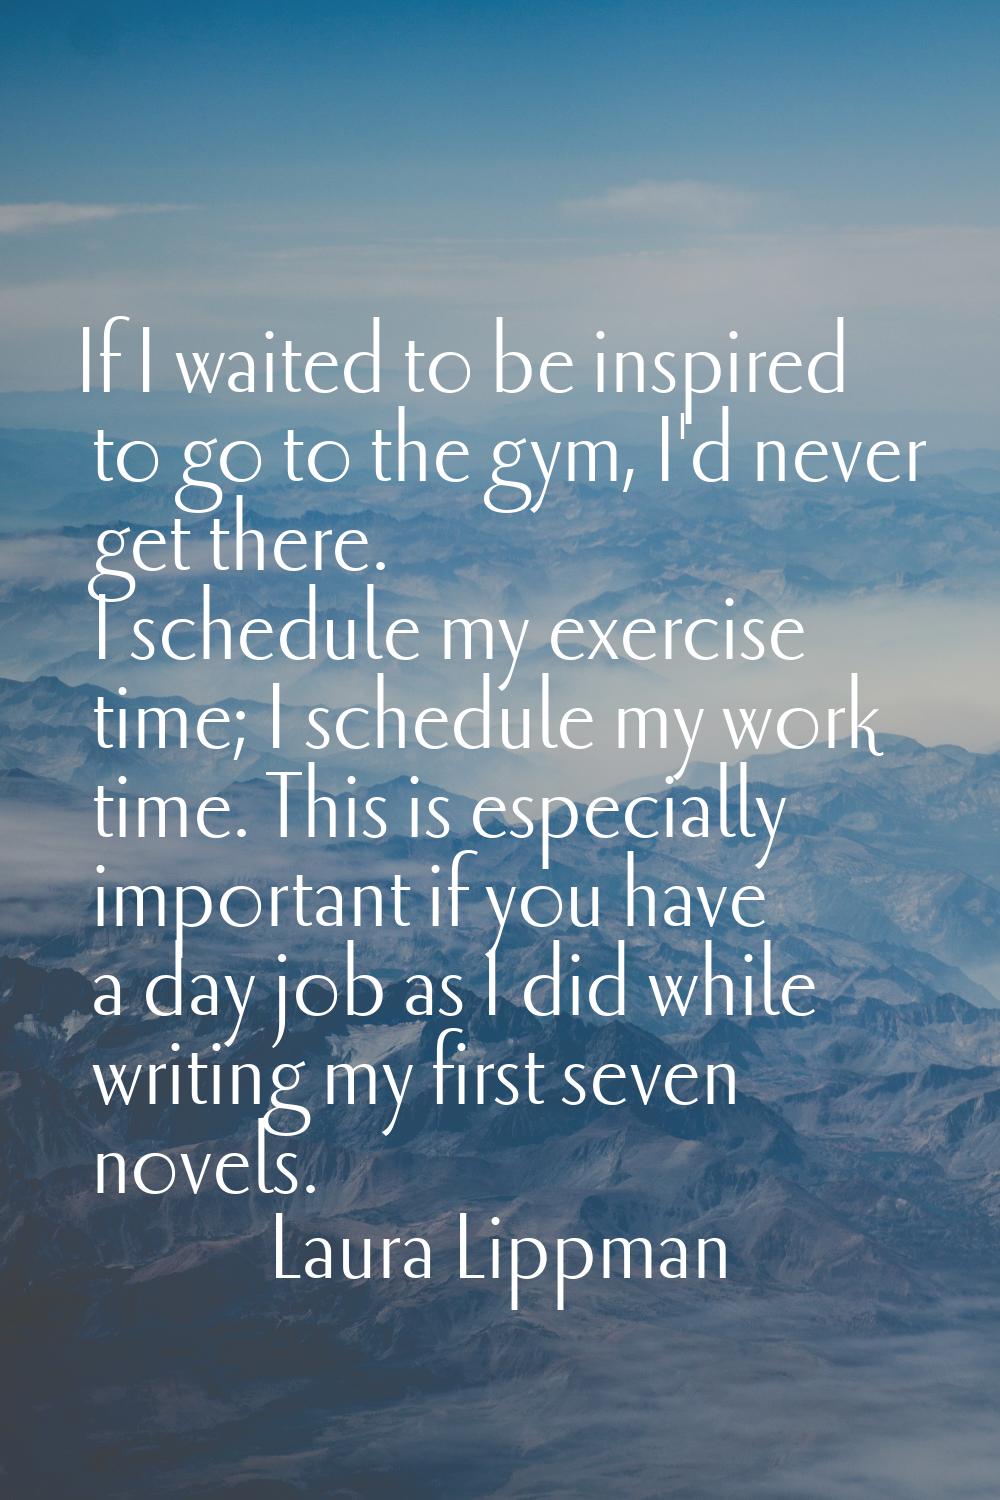 If I waited to be inspired to go to the gym, I'd never get there. I schedule my exercise time; I sc